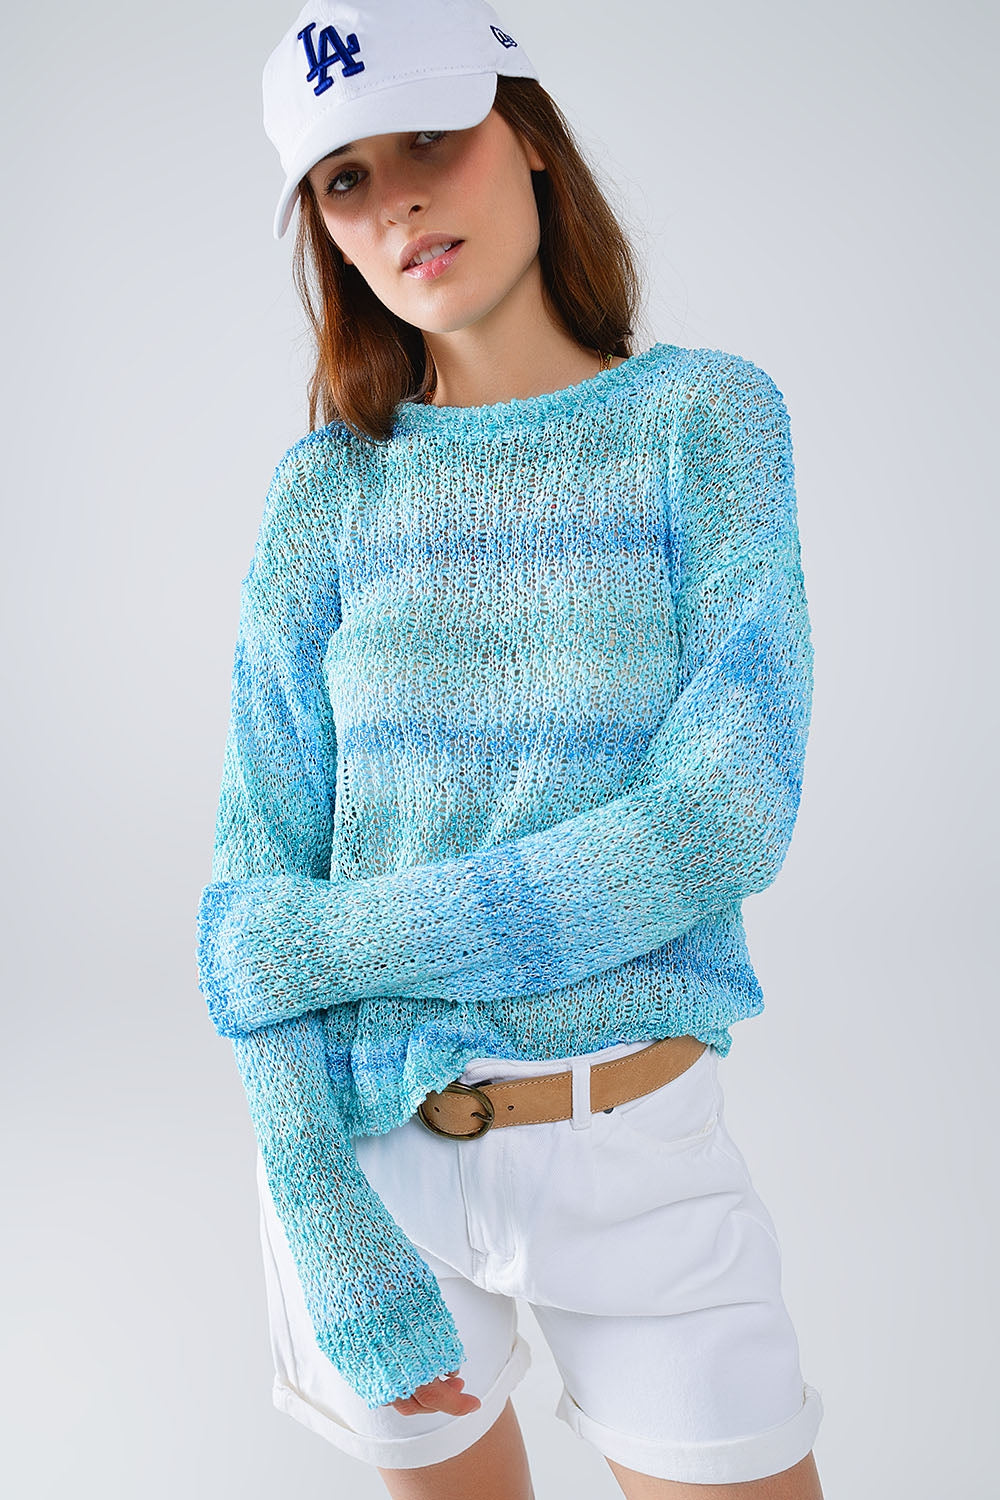 Q2 Open Knit Stripey Crew Neck Sweater in Shades of Blue